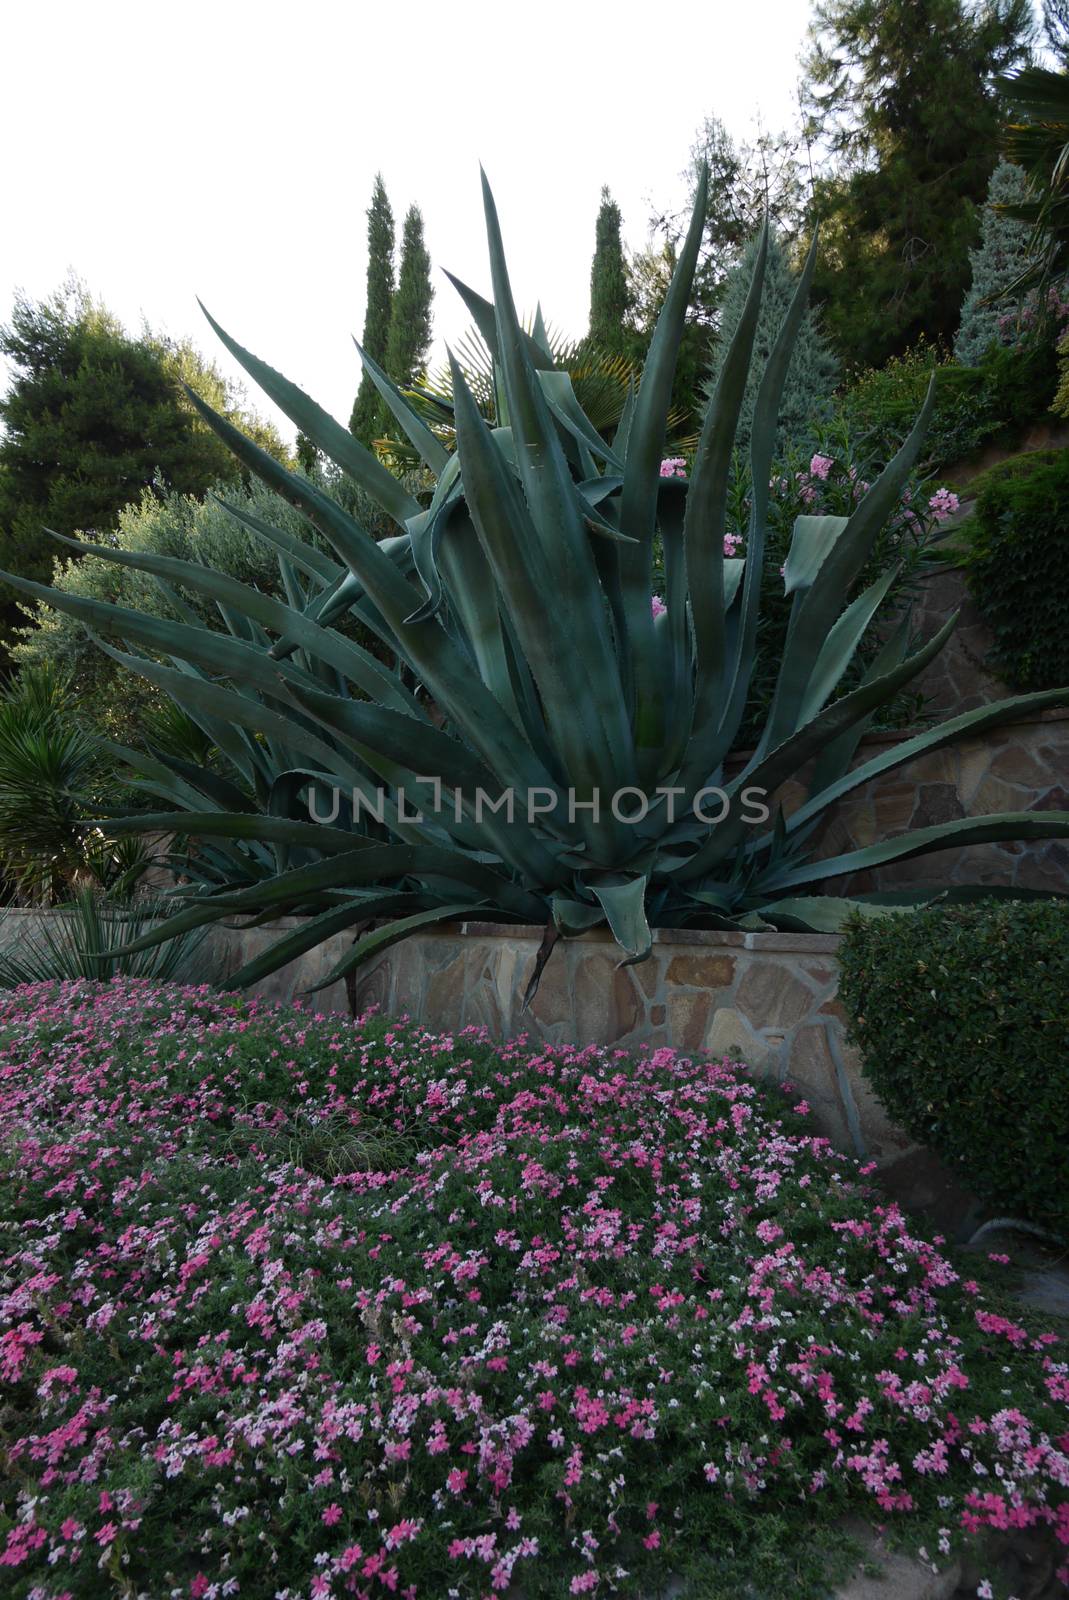 giant juicy green leaves of a mysterious plant growing in a park on a flower bed